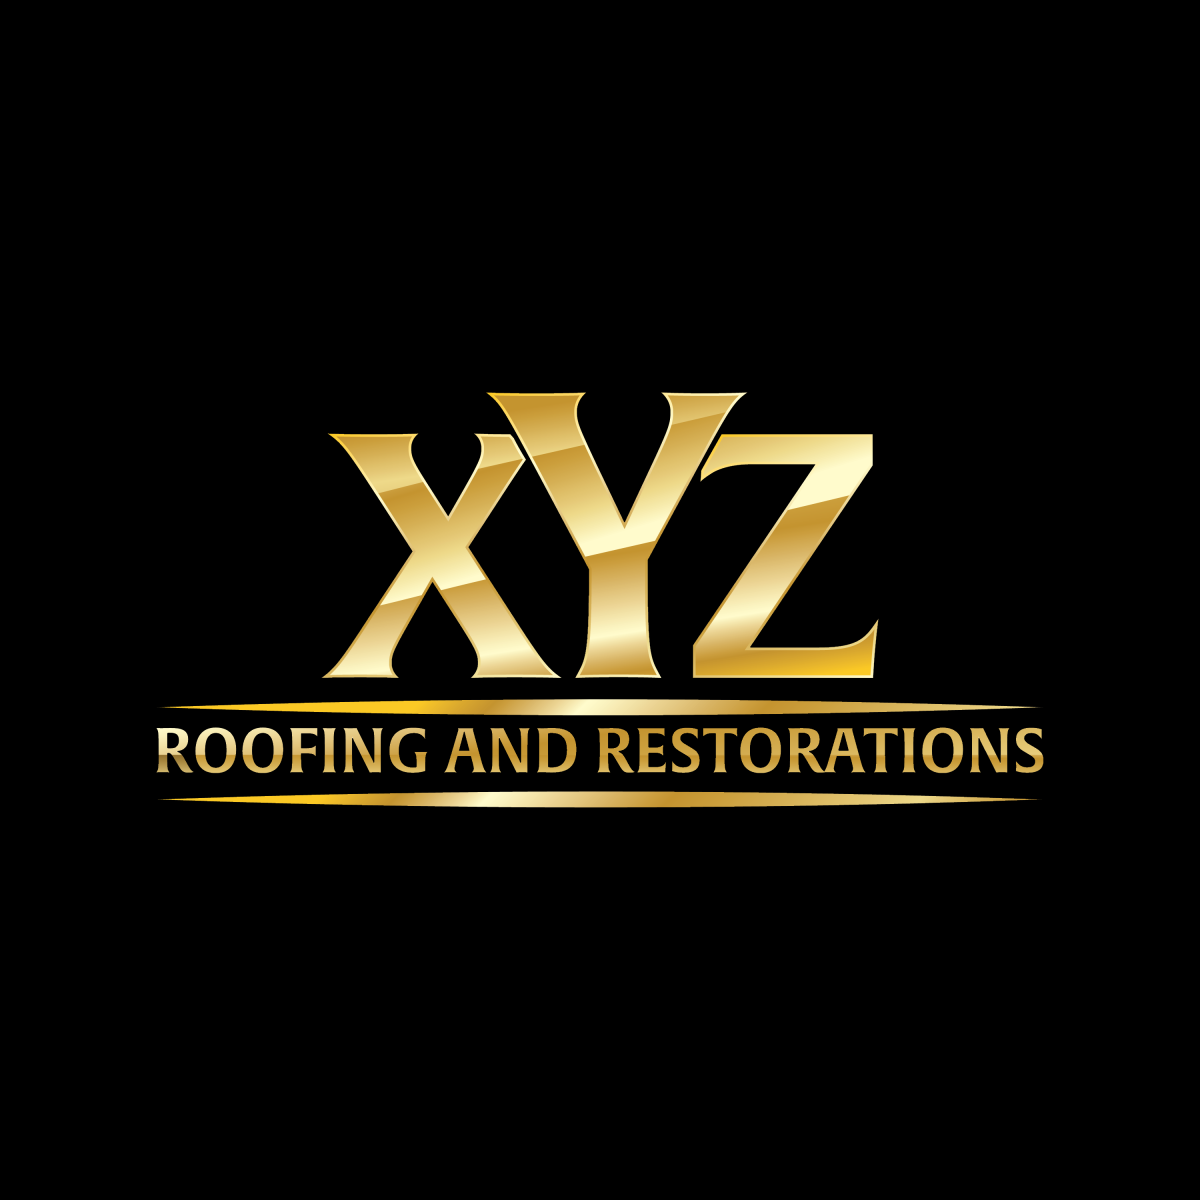 XYZ Roofing and Restorations - Brownsville, TX